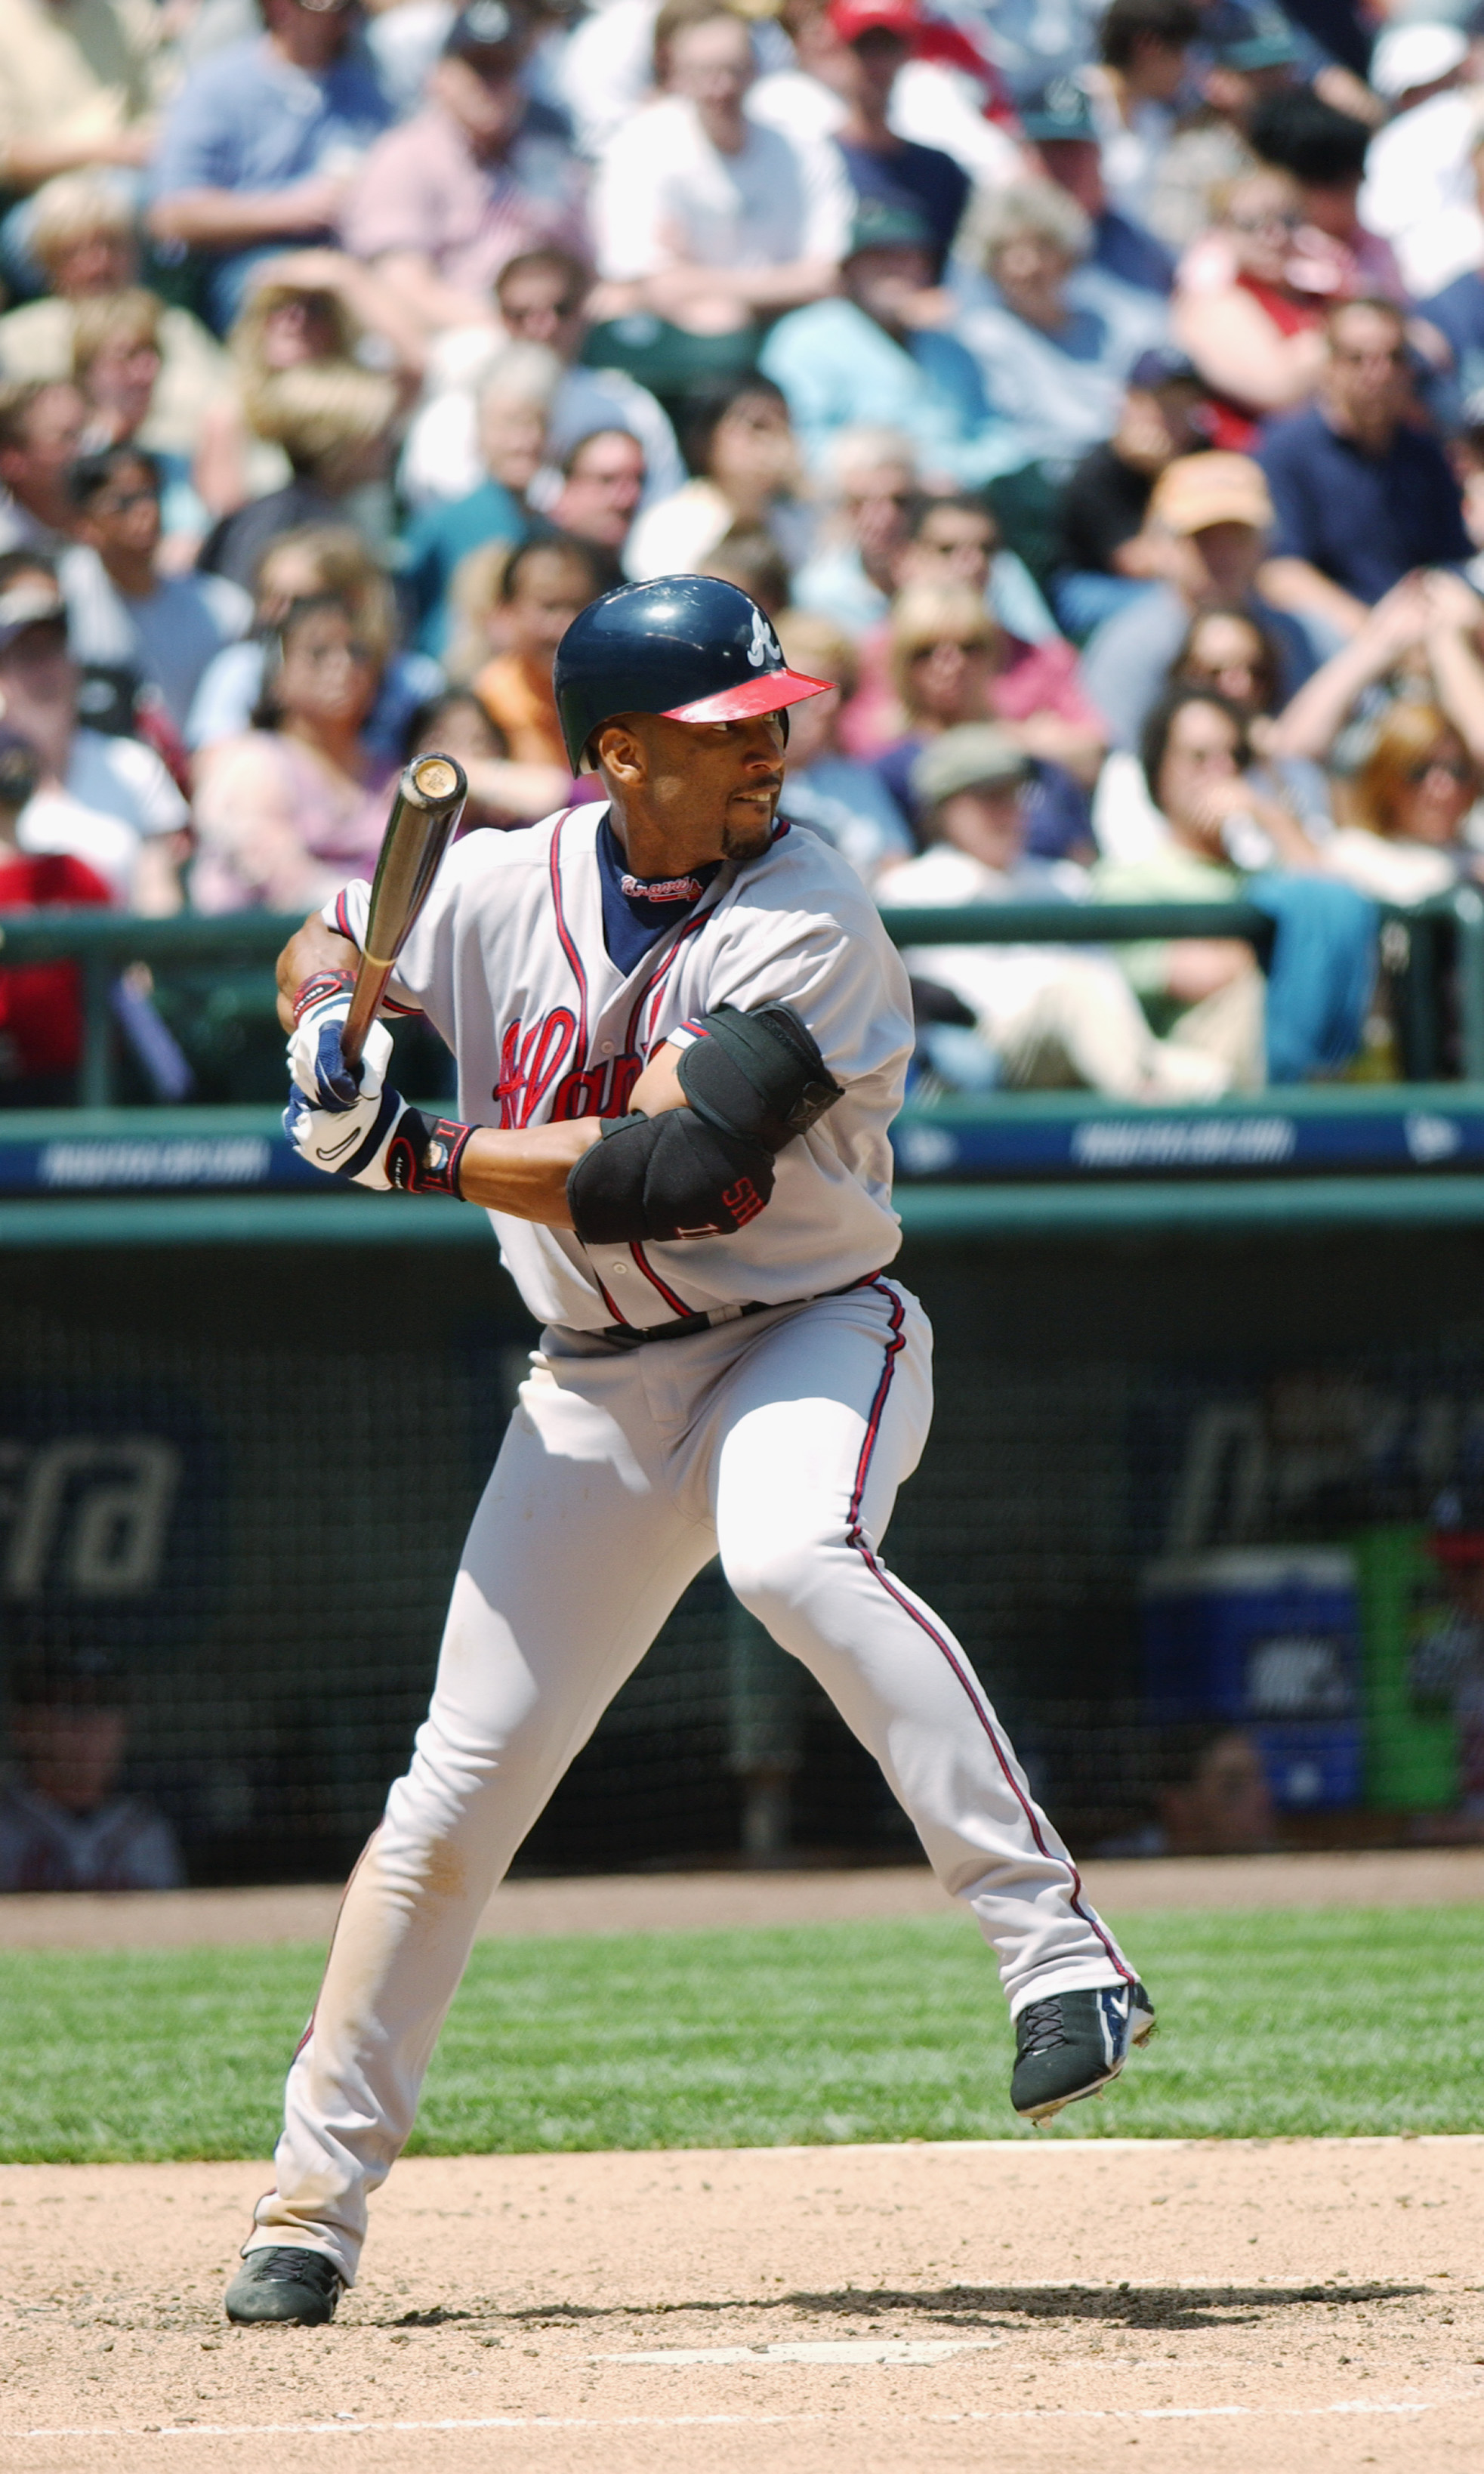 SEATTLE - JUNE 14:  Right fielder Gary Sheffield #11 of the Atlanta Braves swings at a Seattle Mariners pitch during the interleague game at Safeco Field on June 14, 2003 in Seattle, Washington. Atlanta won 3-1.  (Photo by Otto Greule Jr./Getty Images)